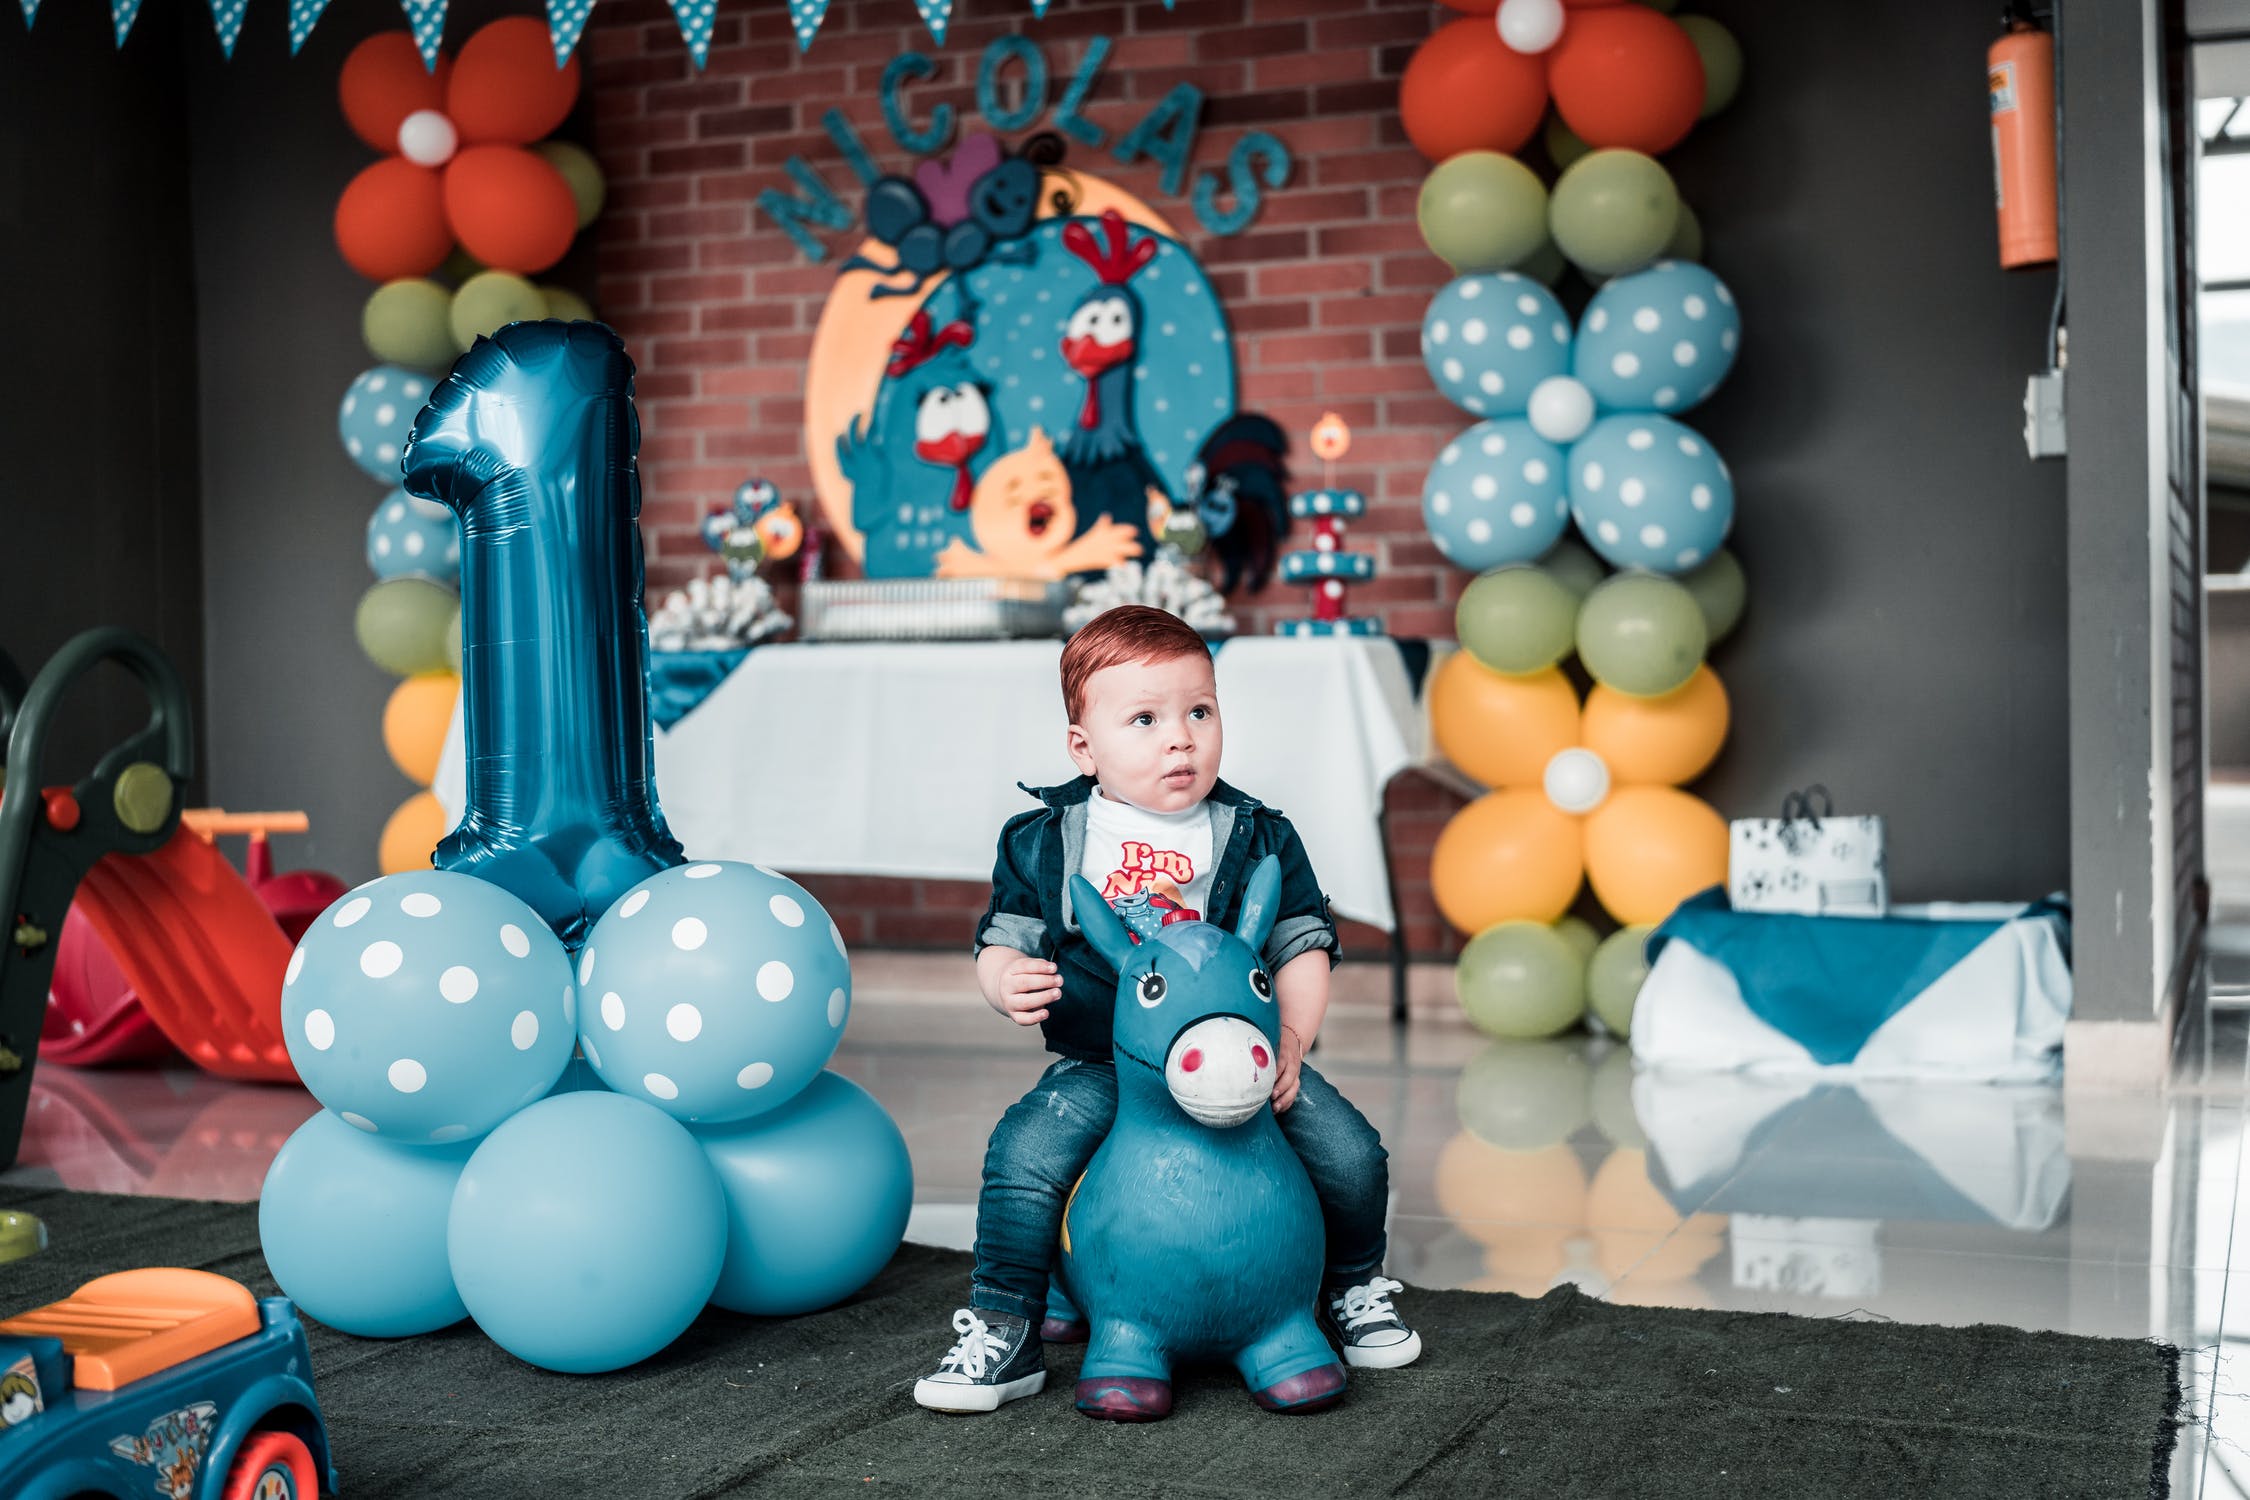 A young boy's birthday party | Photo: Pexels